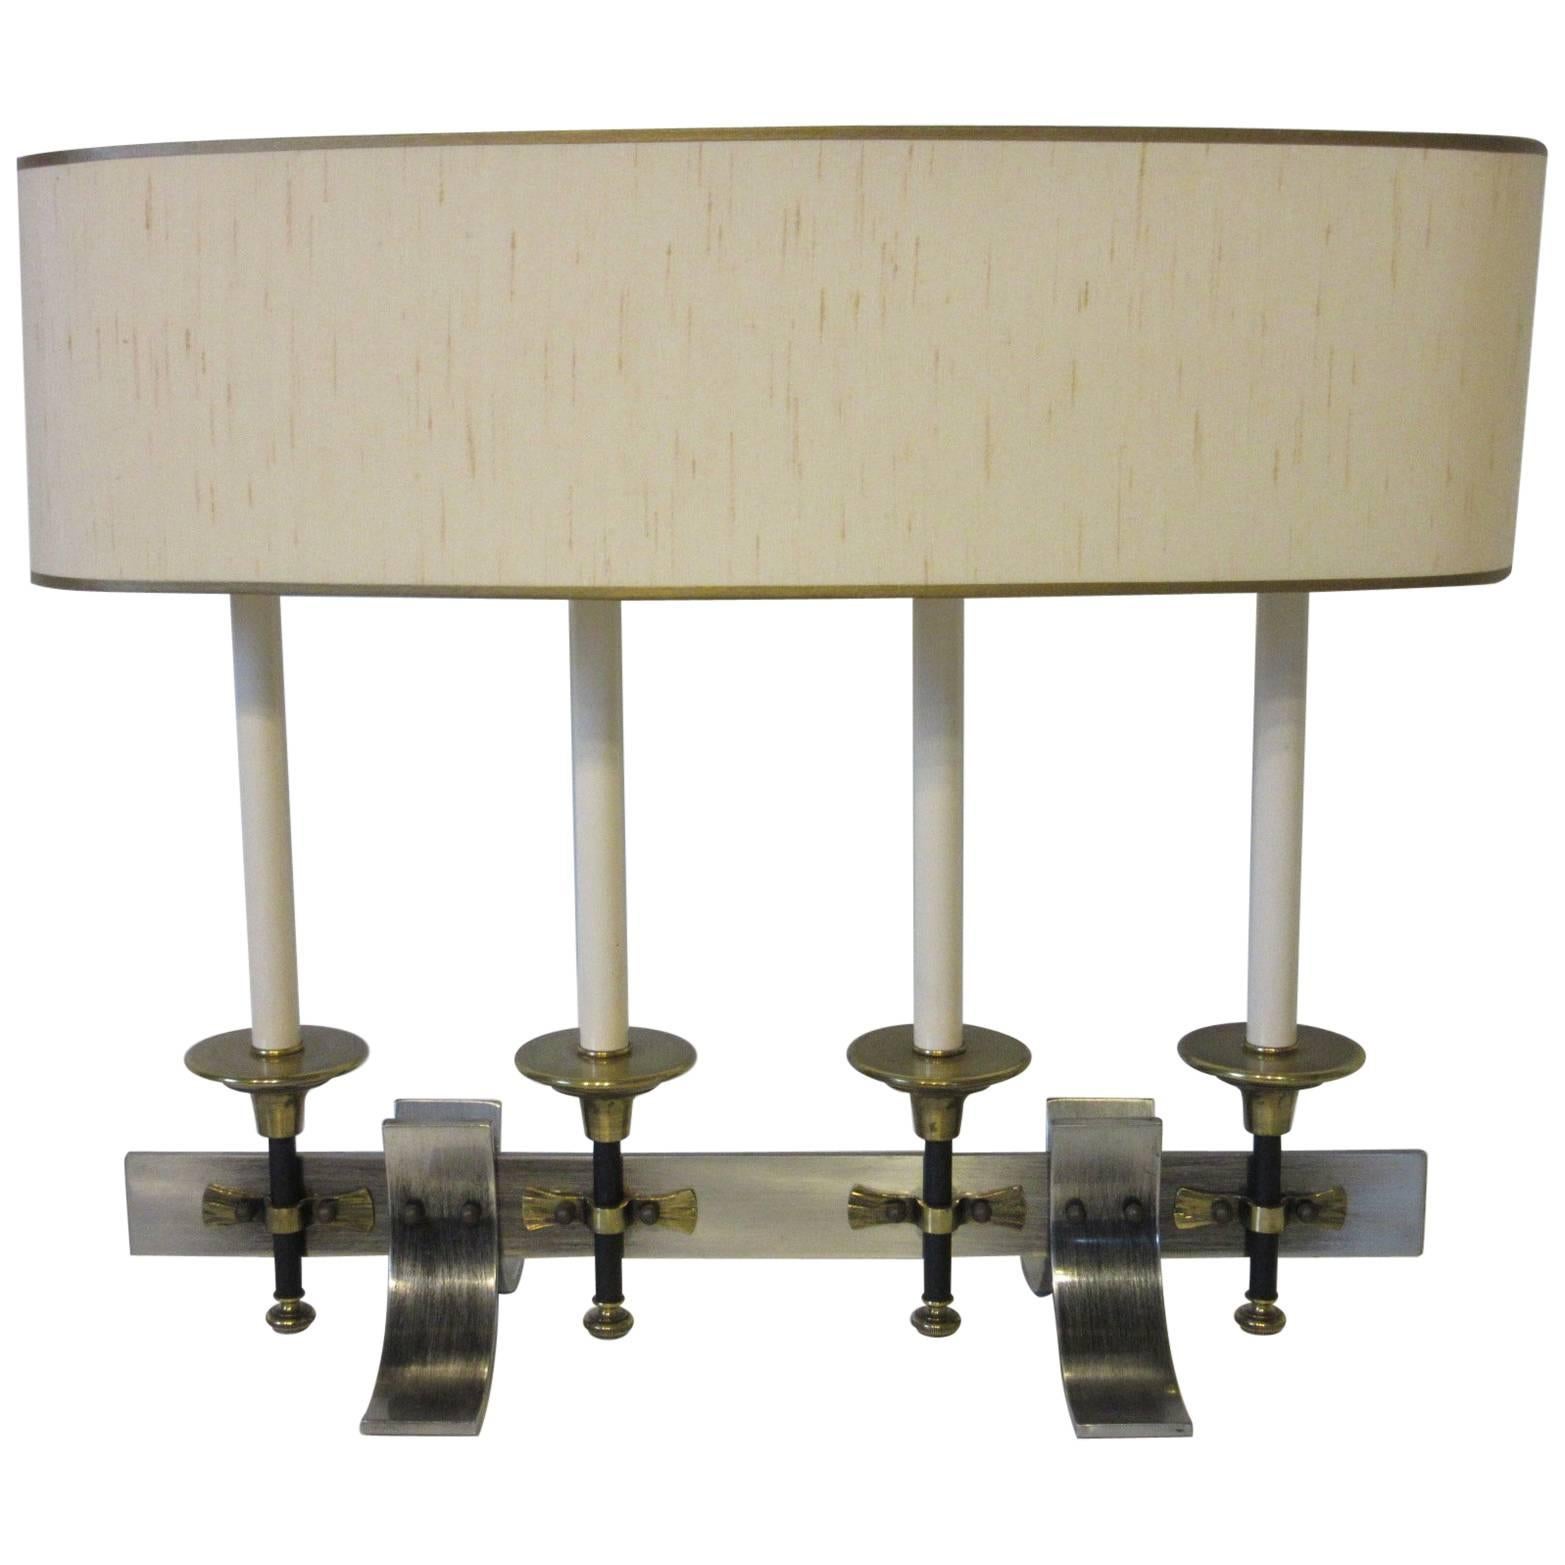 Brass / Brushed Metal Table Lamp in the style of Stiffel and Parzinger For Sale